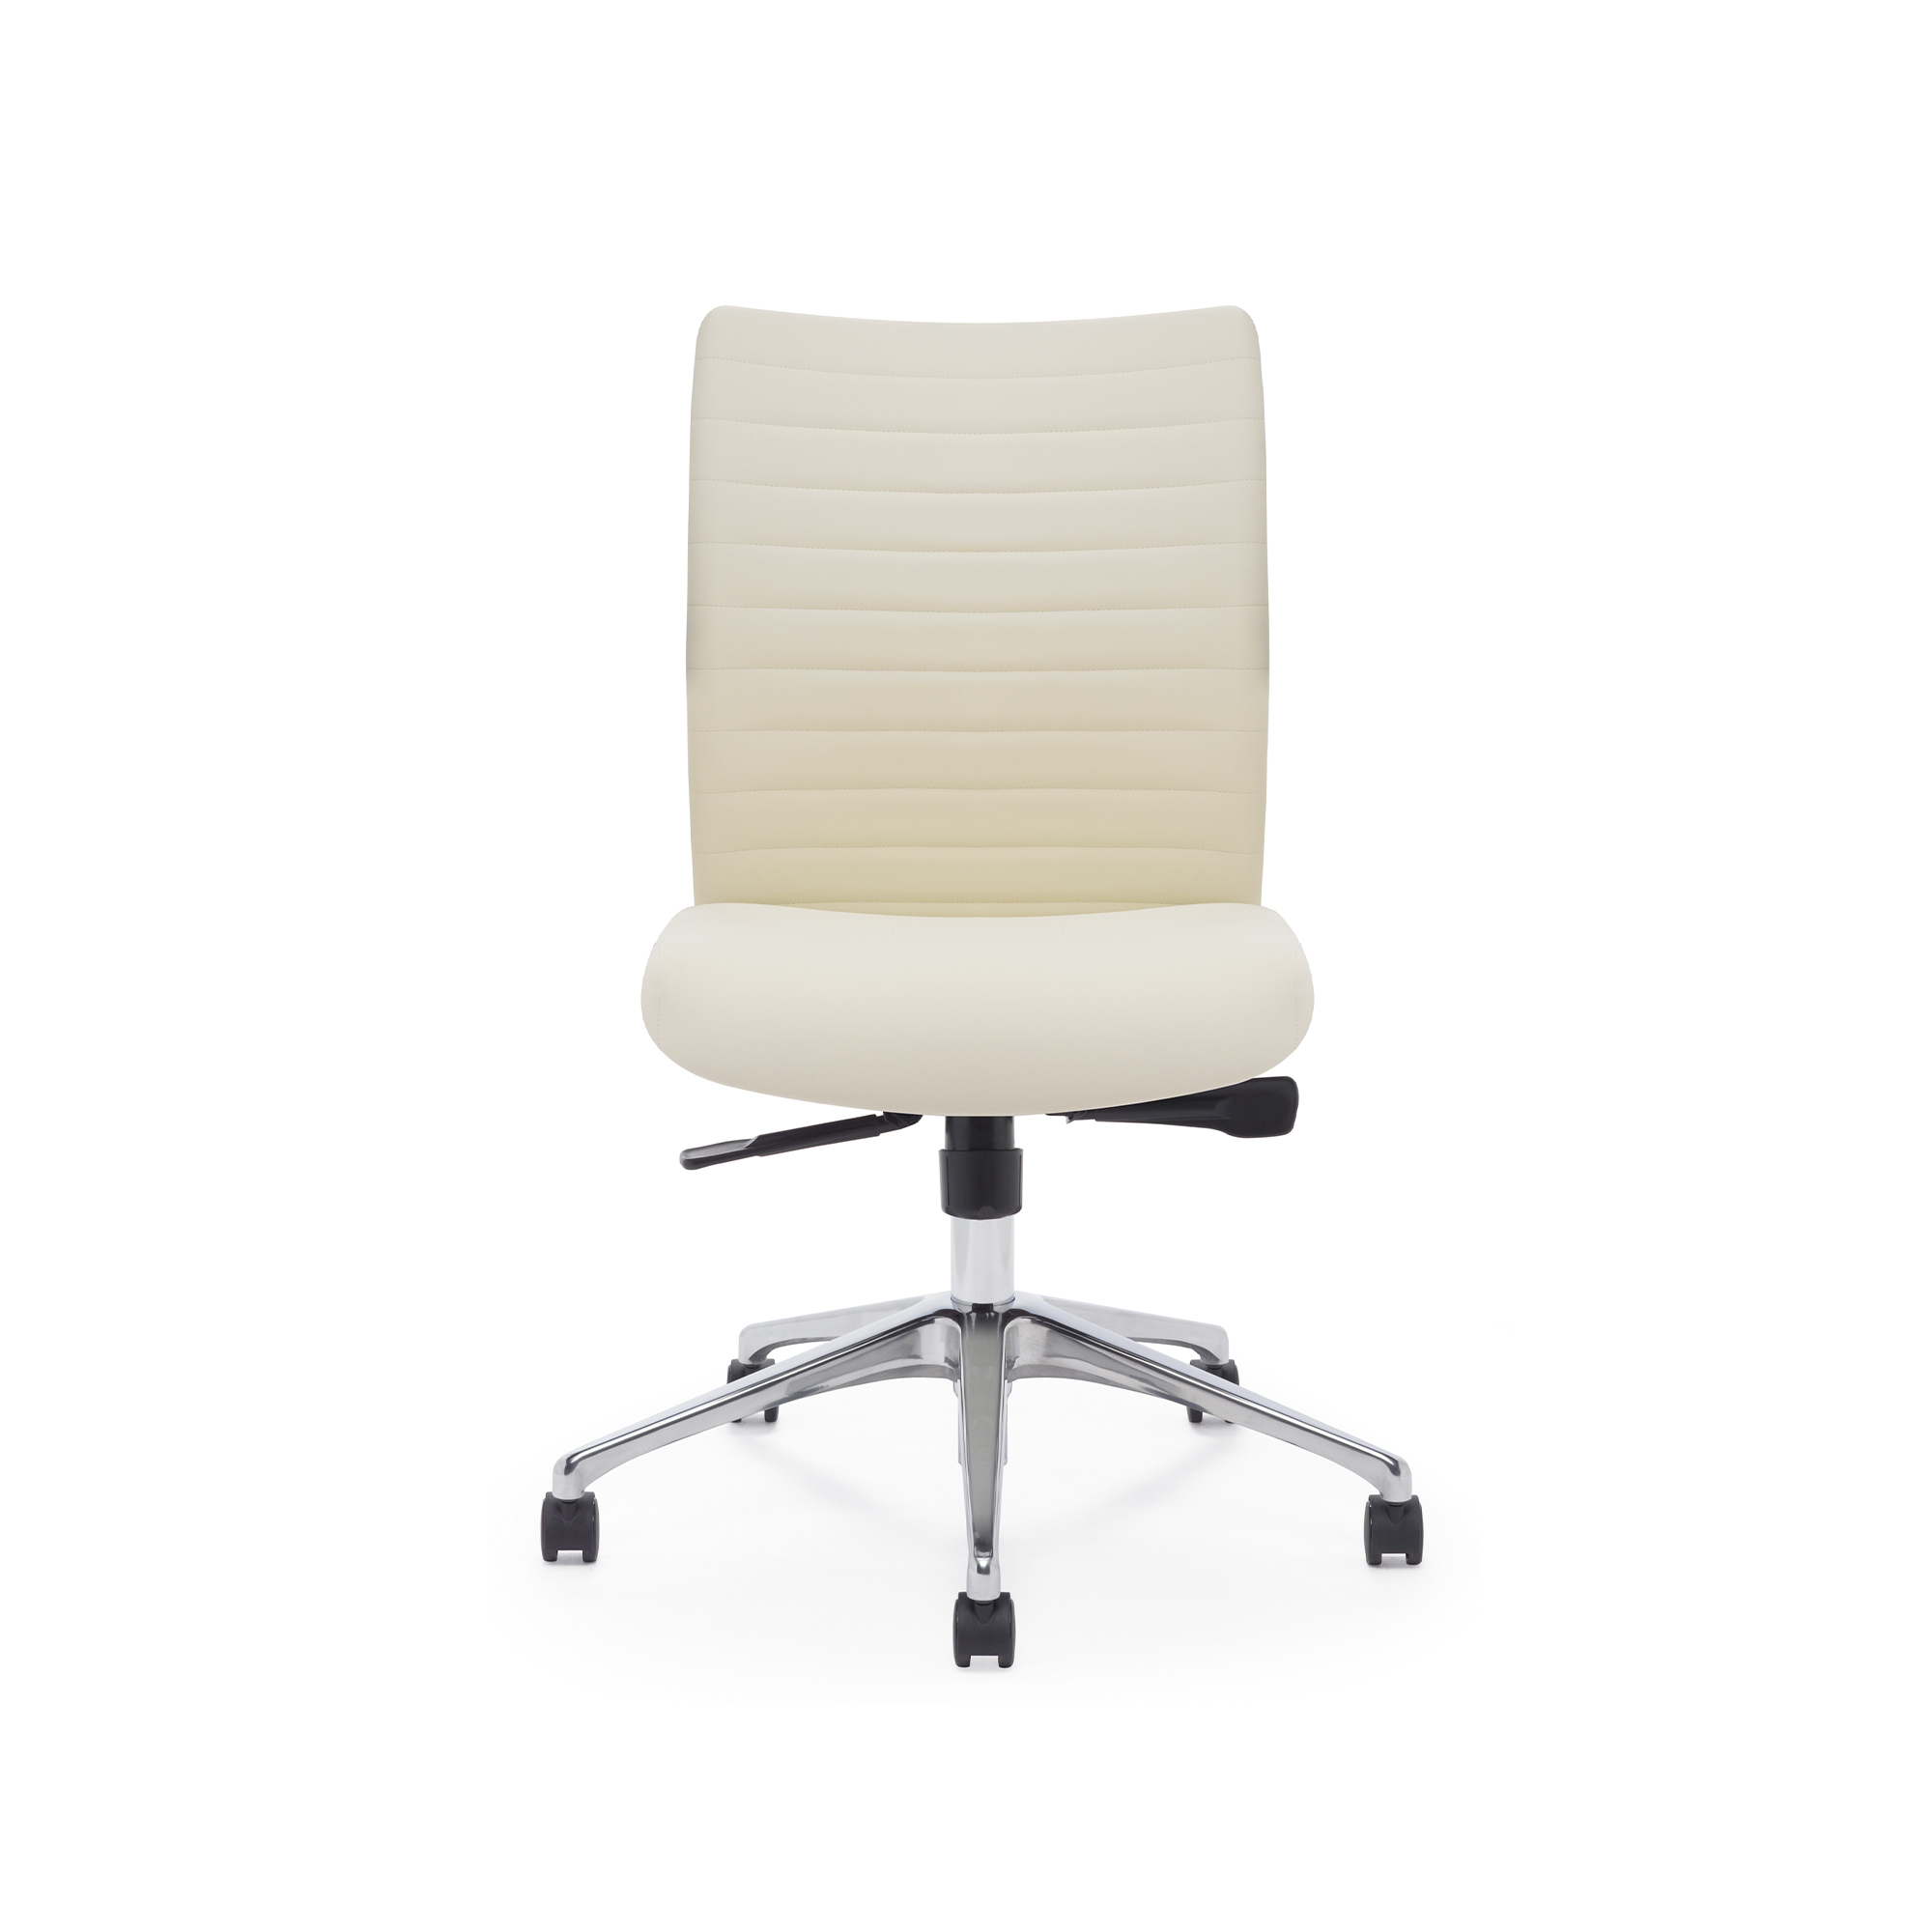 Memento Executive/Conference Chair, Armless, Front View